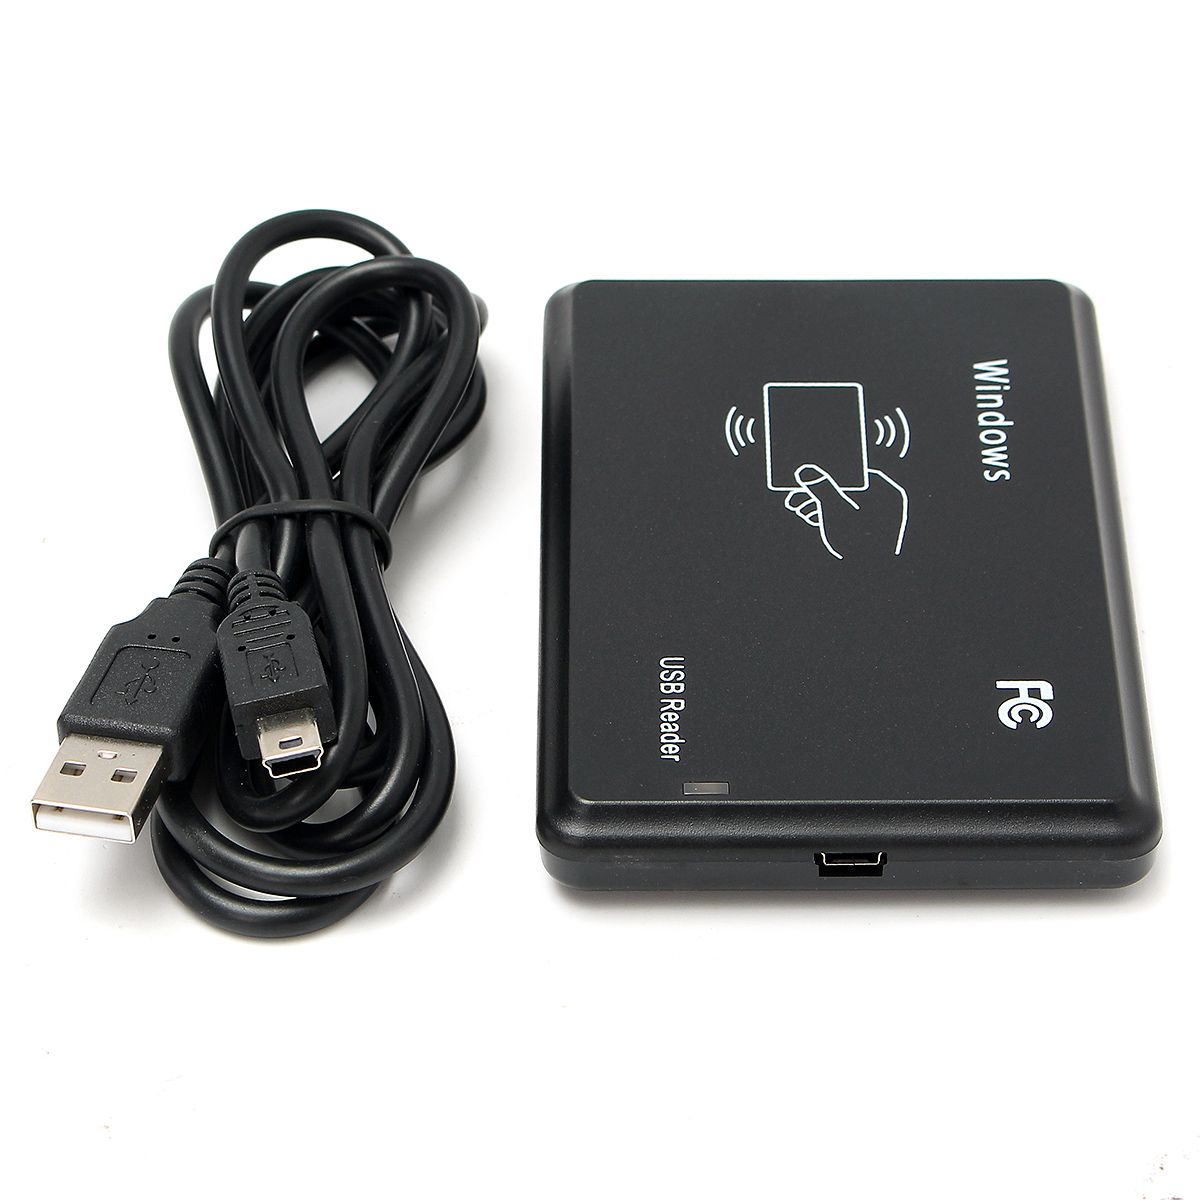 RFID-Reader-Contactless-Mifare-IC-Card-Reader-USB-1356MHZ-14443A-106Kbits-1286576